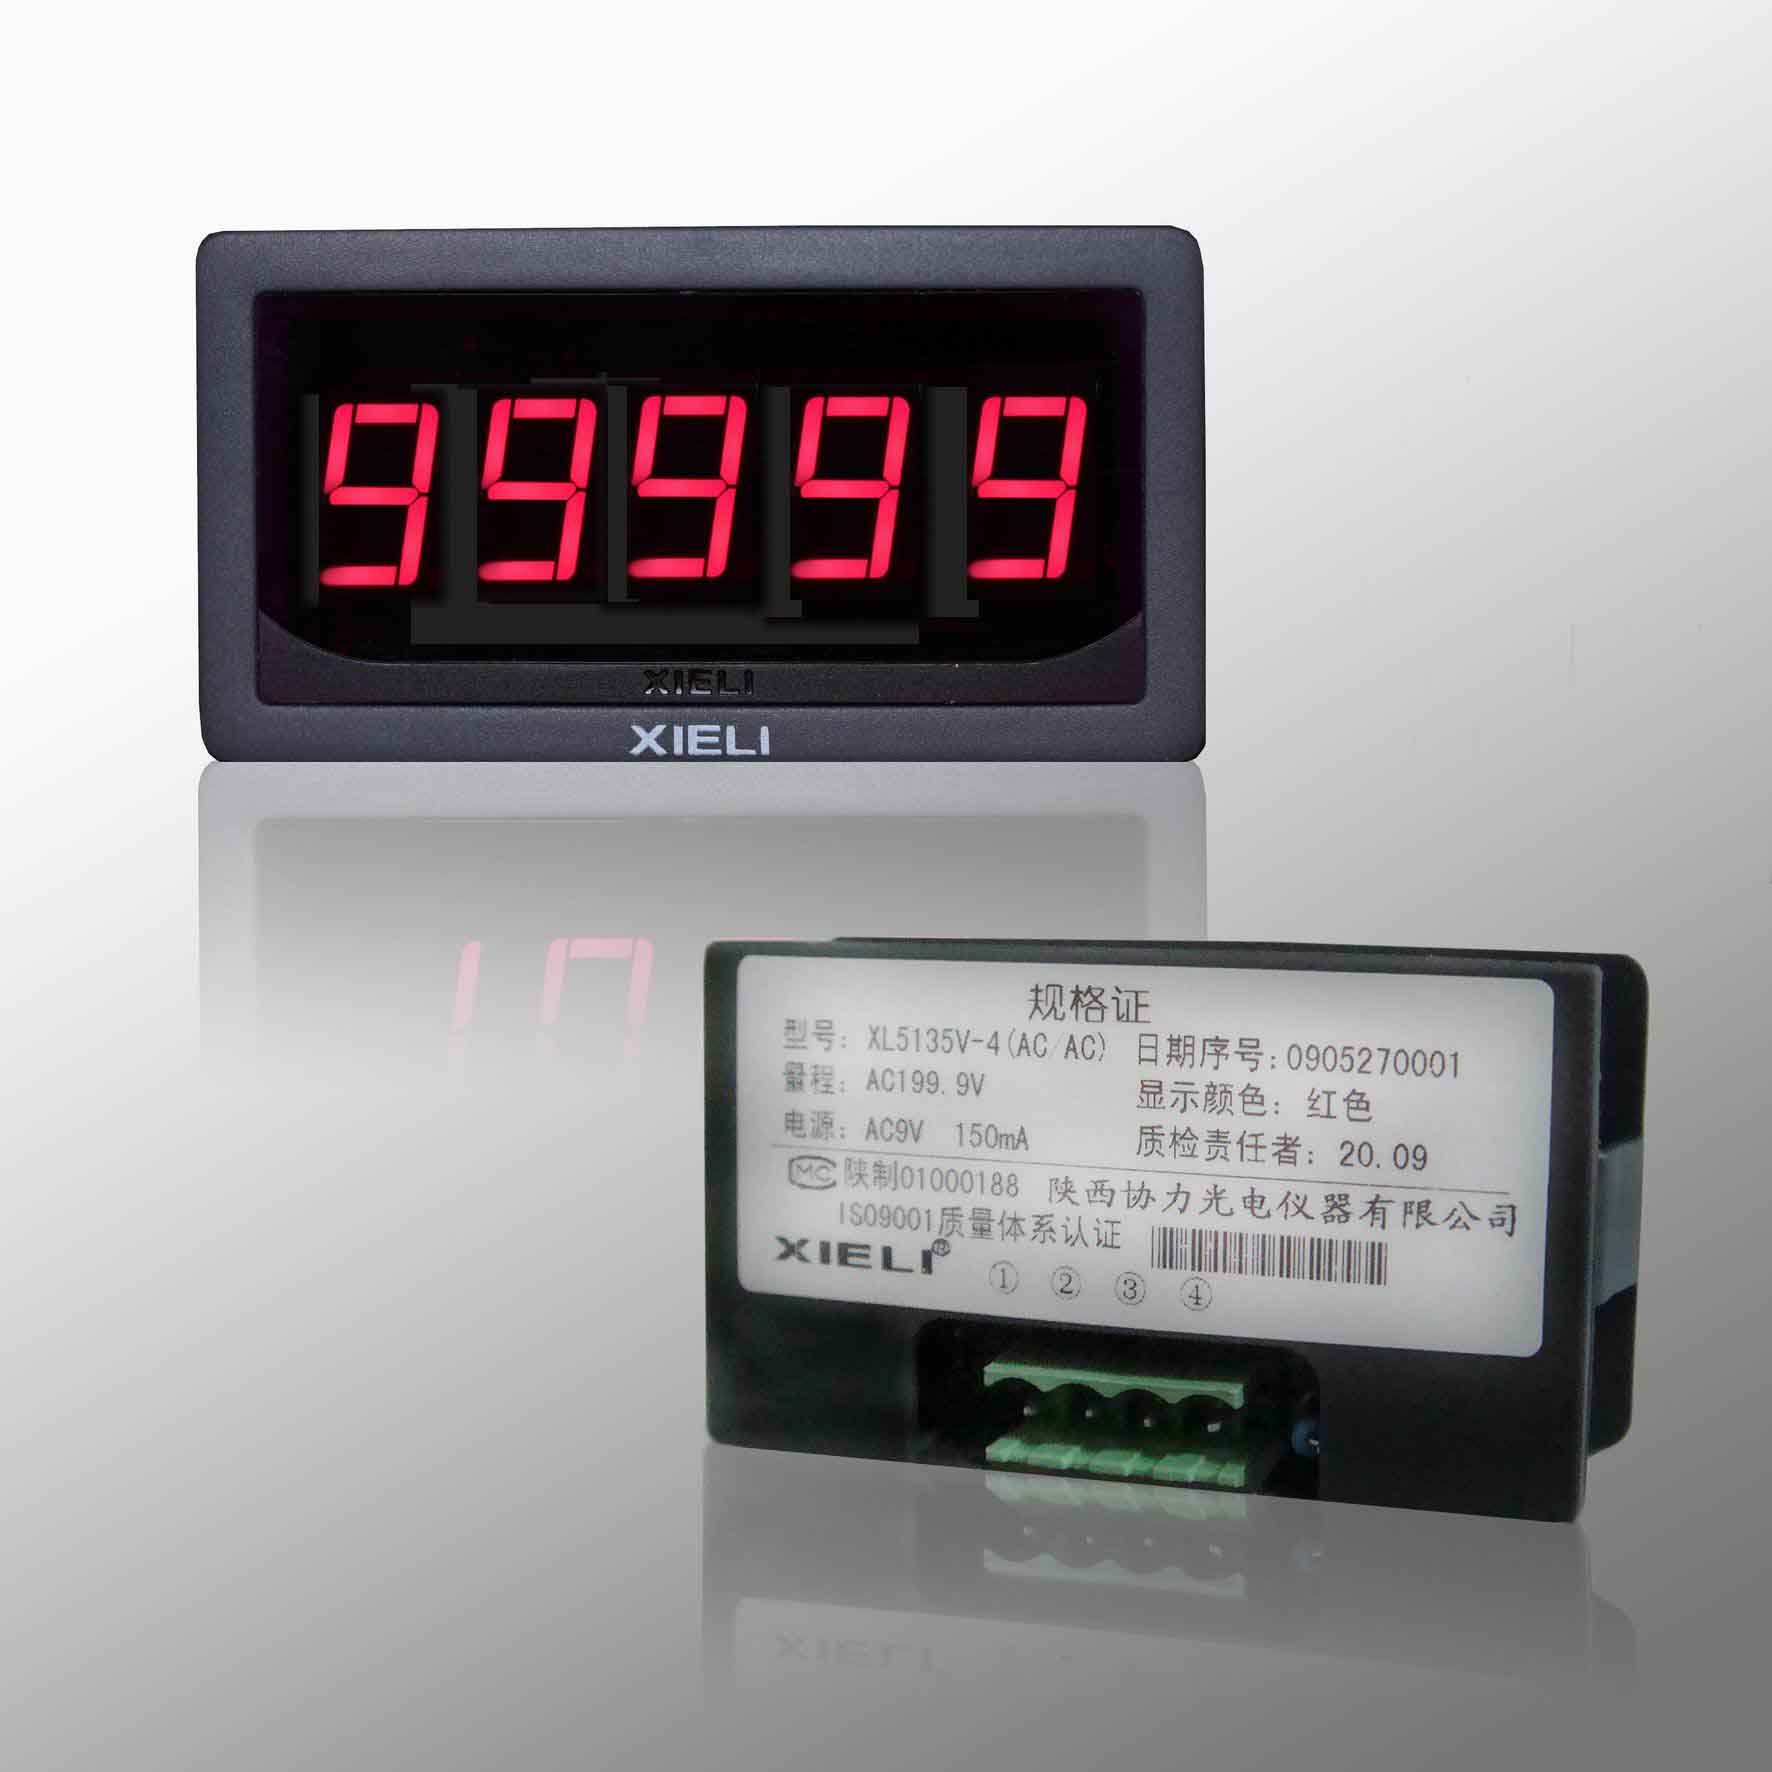 Ttl Signal 5 Digits Pulse Counter - Buy Pulse Meter Counter ...